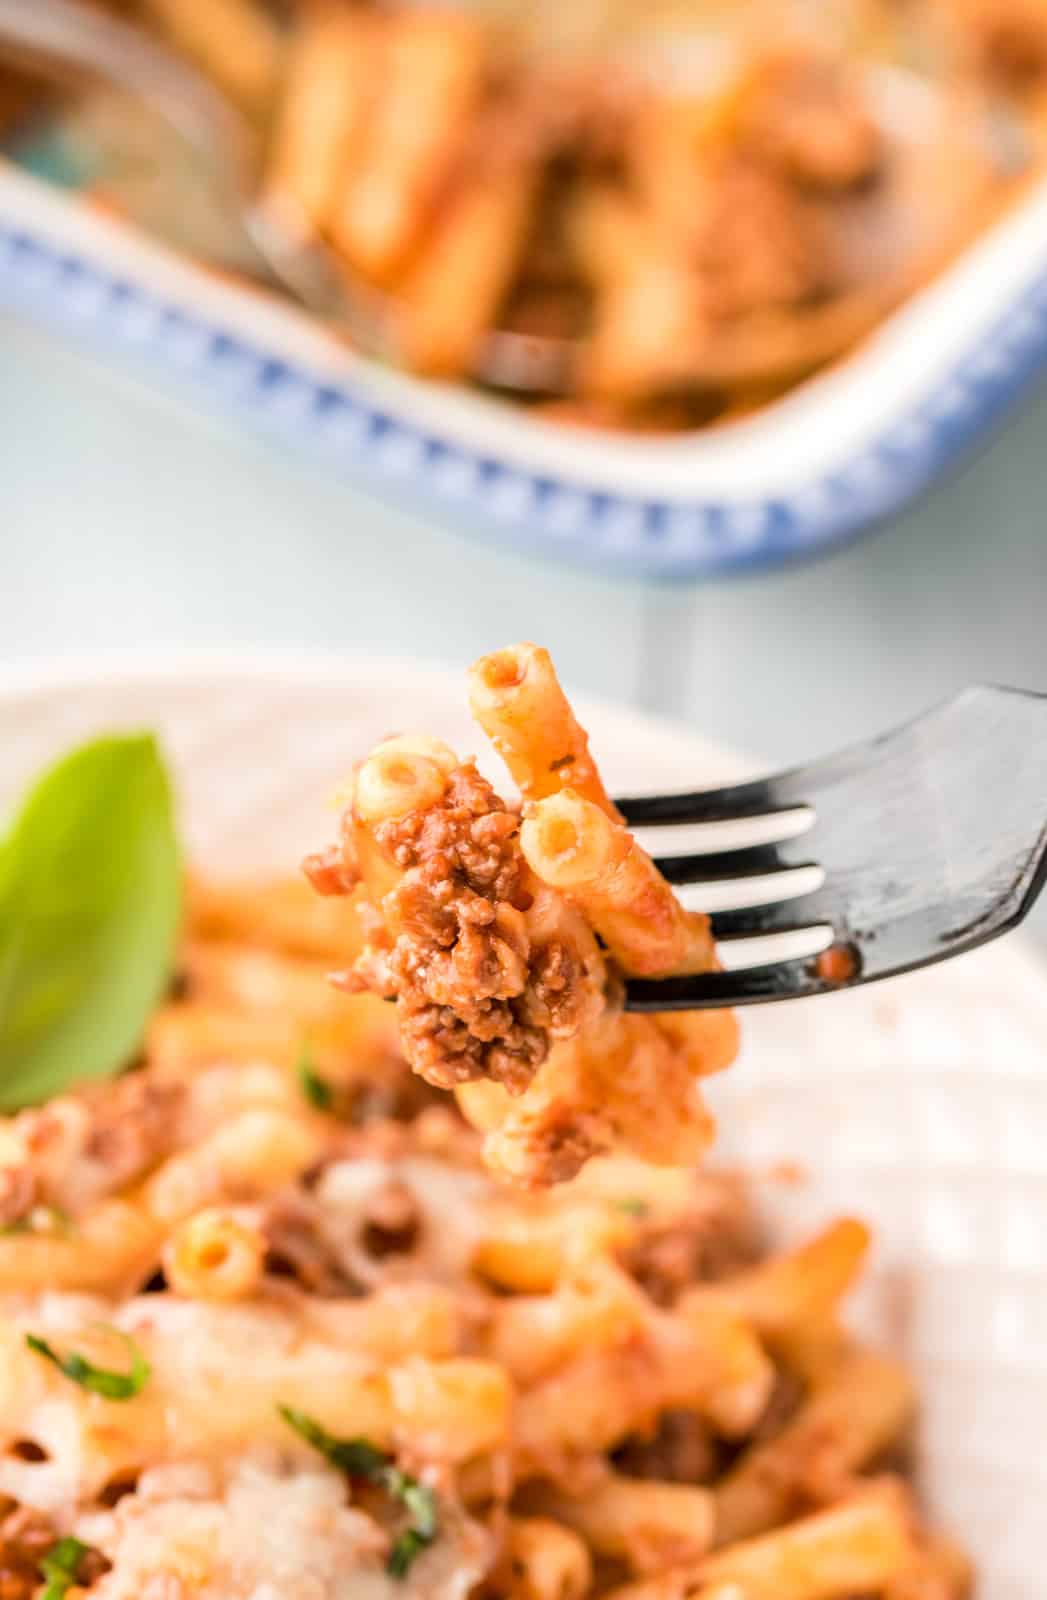 Fork holding up a bite of Baked Ziti Recipe out of bowl.